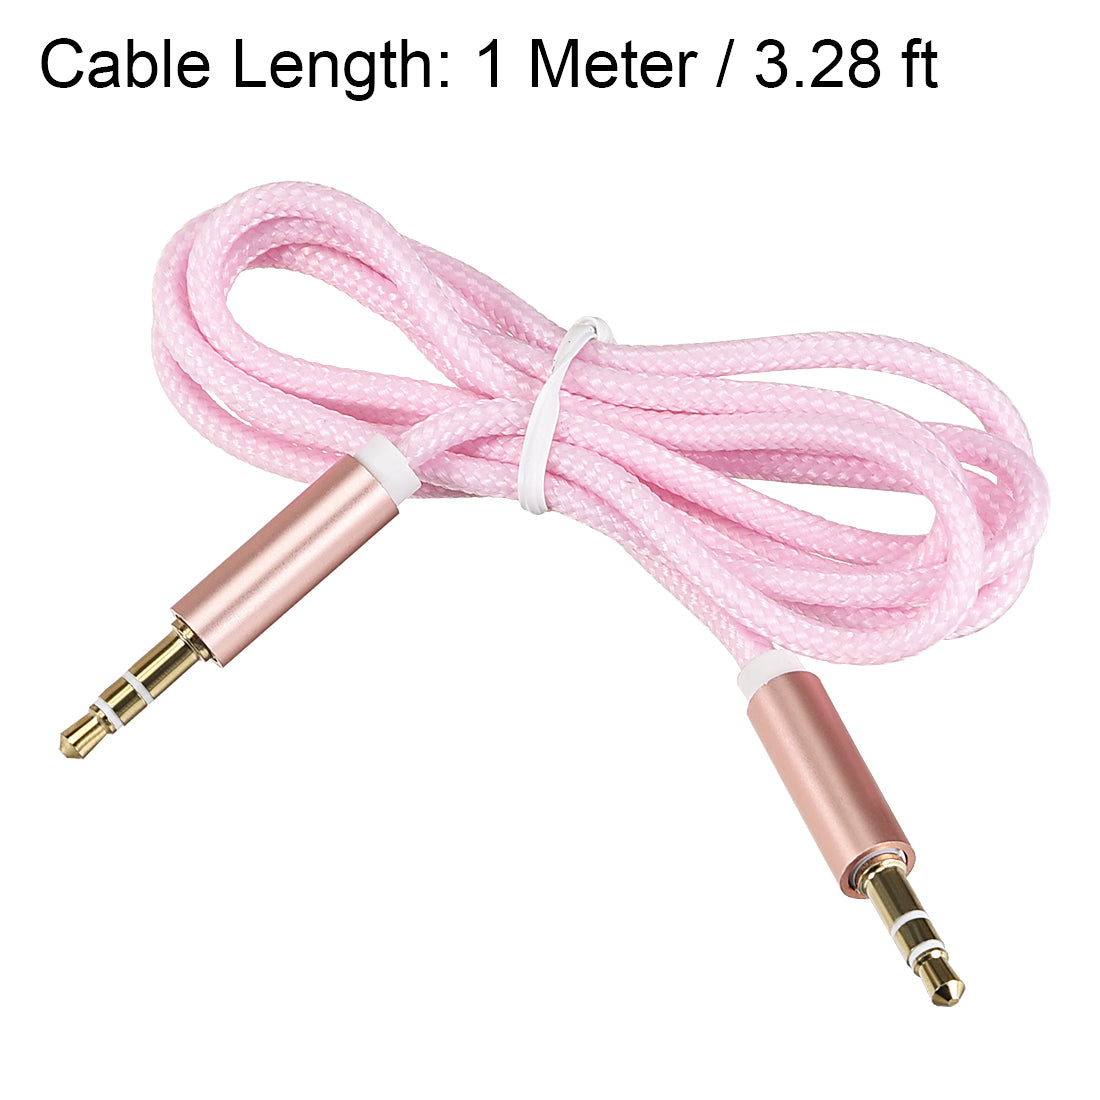 uxcell Uxcell 3.5mm Male to Male  Cable Stereo  Extension, 1 Meter Long, Nylon Sheathed, for Headphones Smartphones Notebooks, Pink